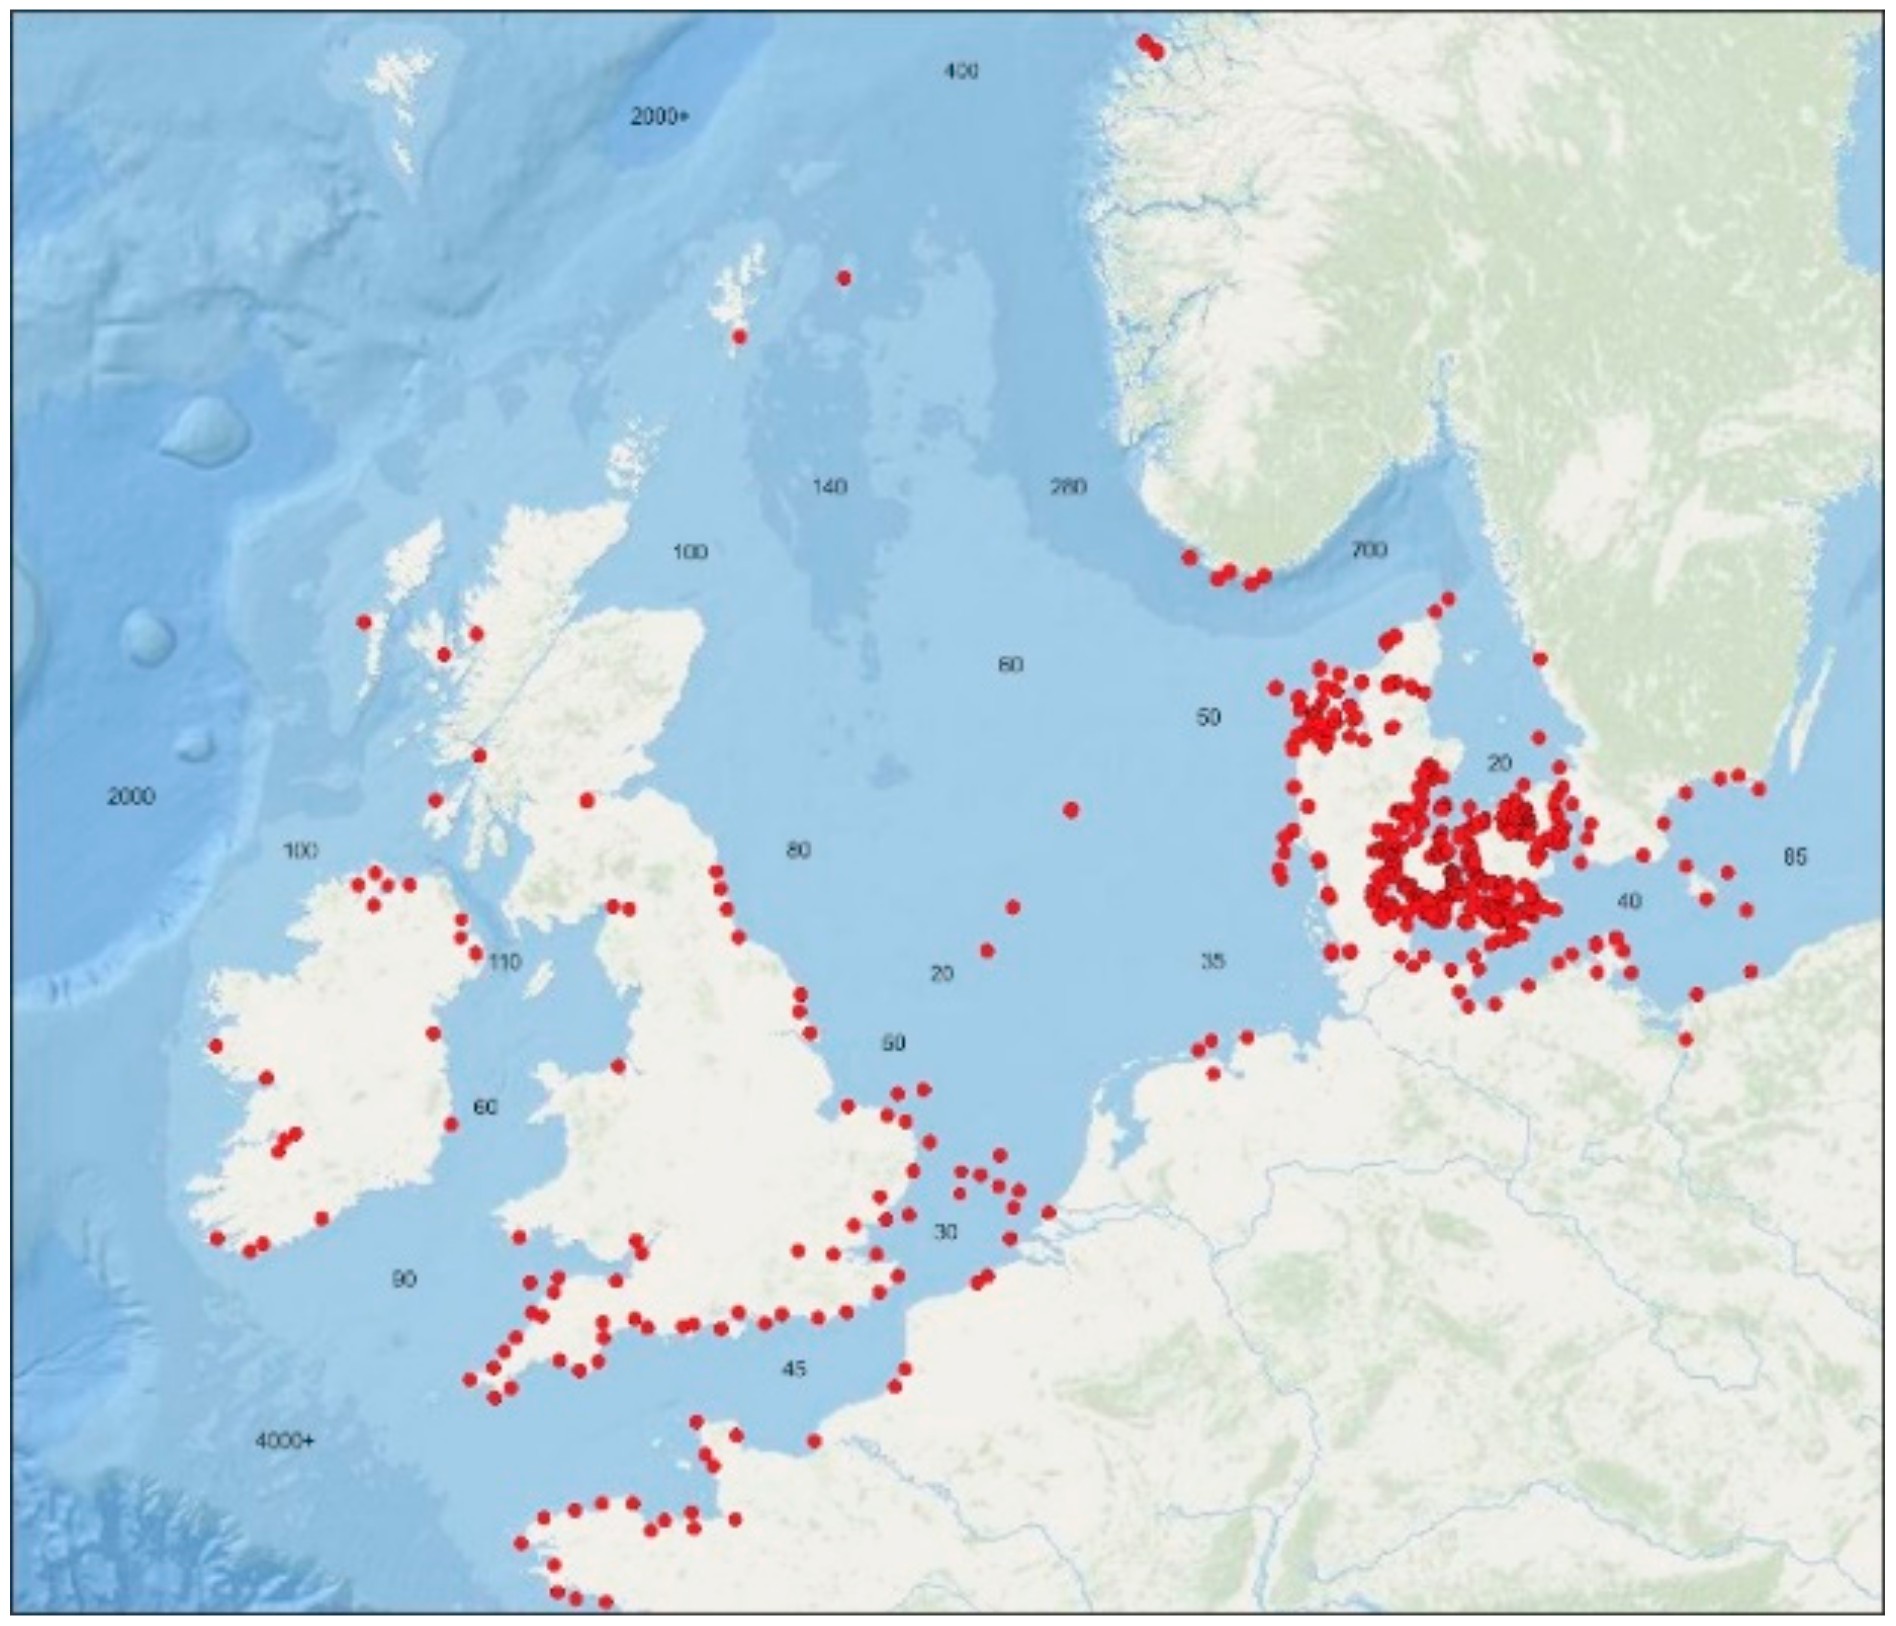 The red dots show submerged Stone Age sites in Northwestern Europe. Graphic: Ole Grøn